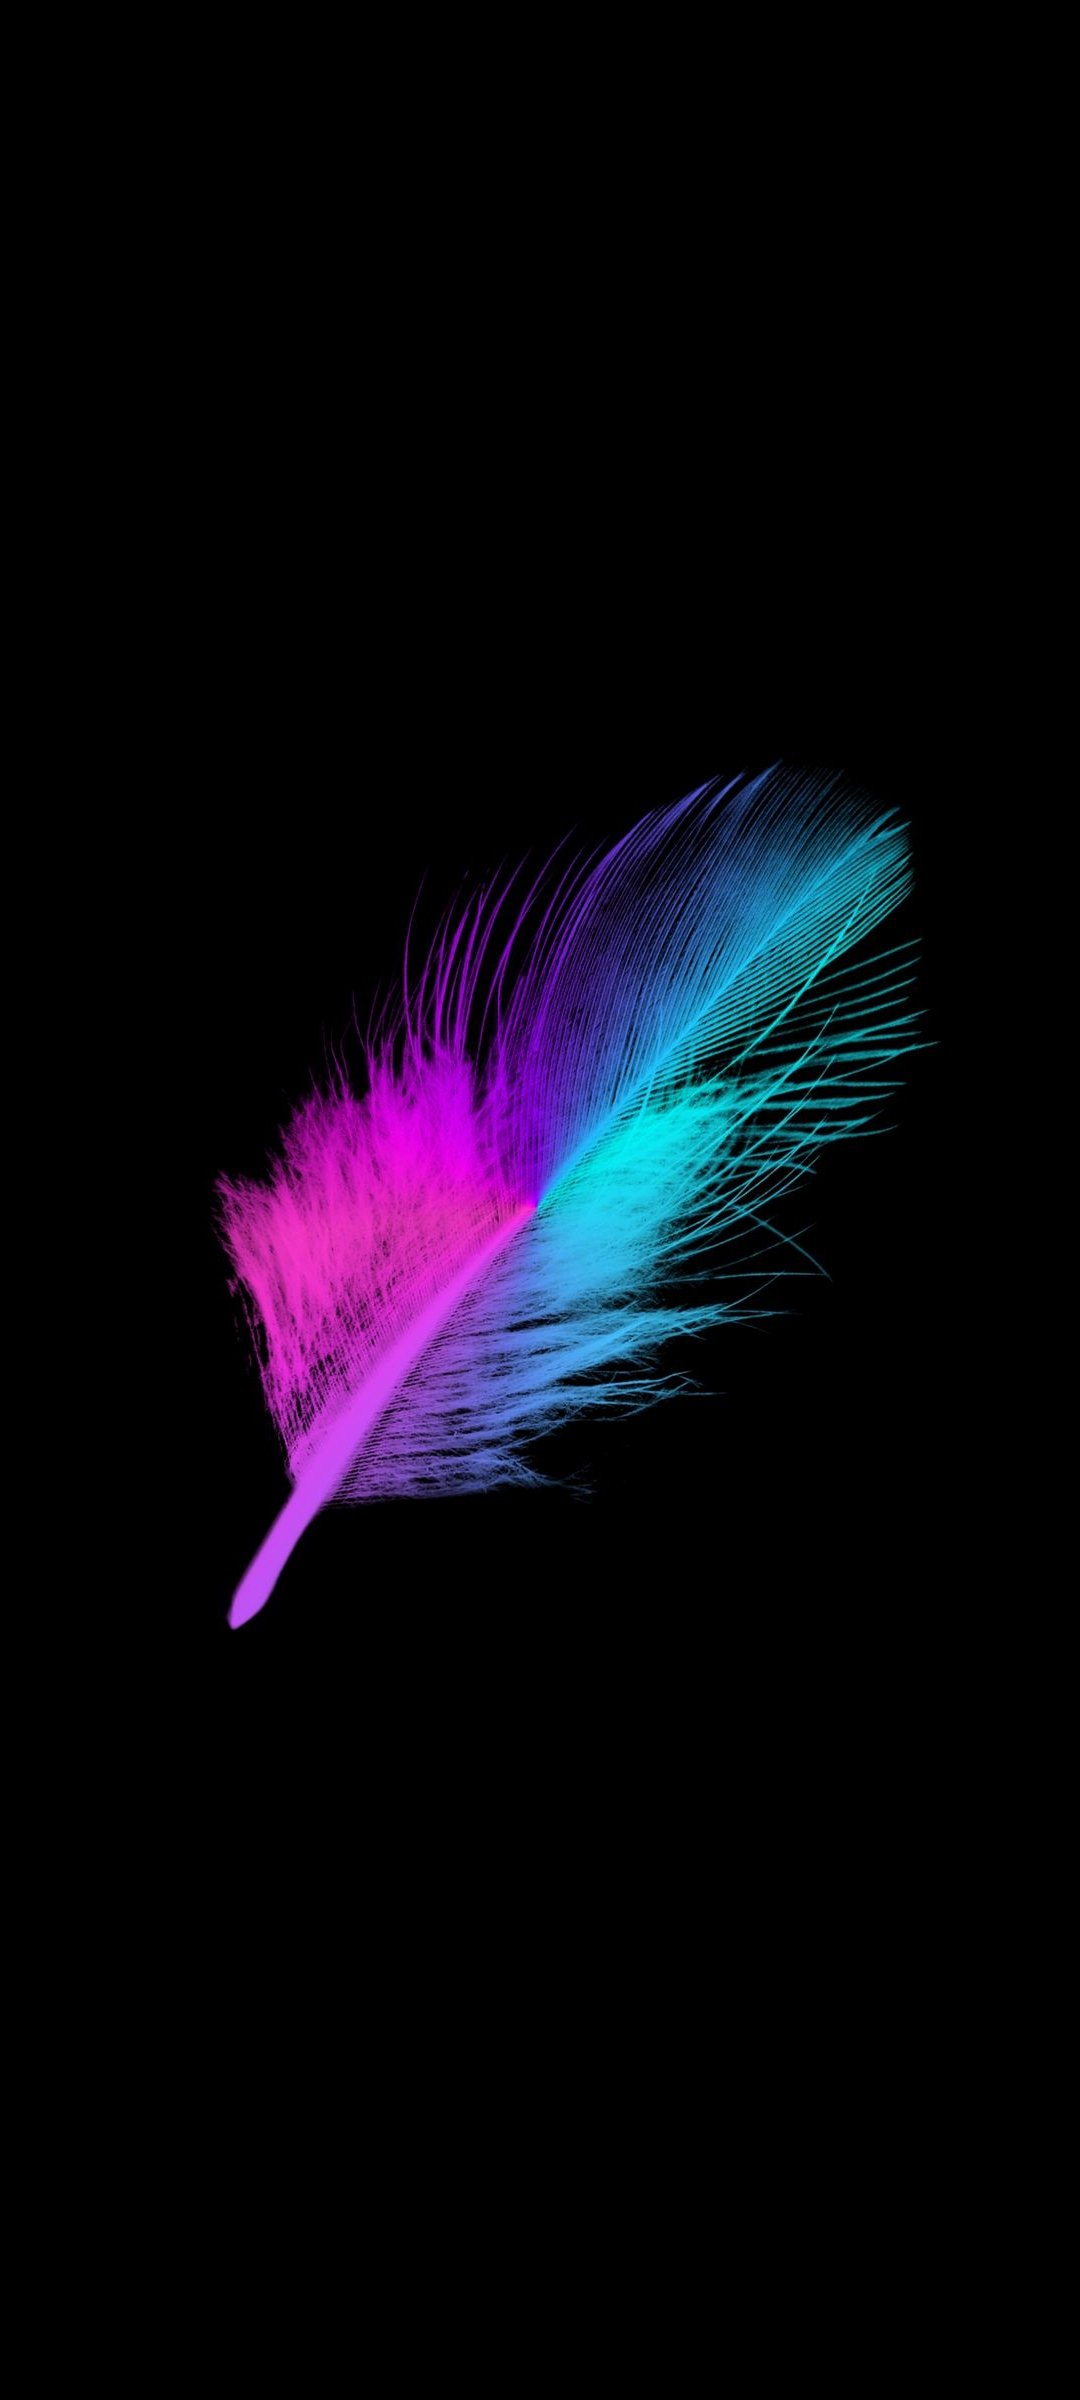 Elegant Colorful Peacock Feather Wallpaper For Interior Mural Painting  Backgrounds  JPG Free Download  Pikbest